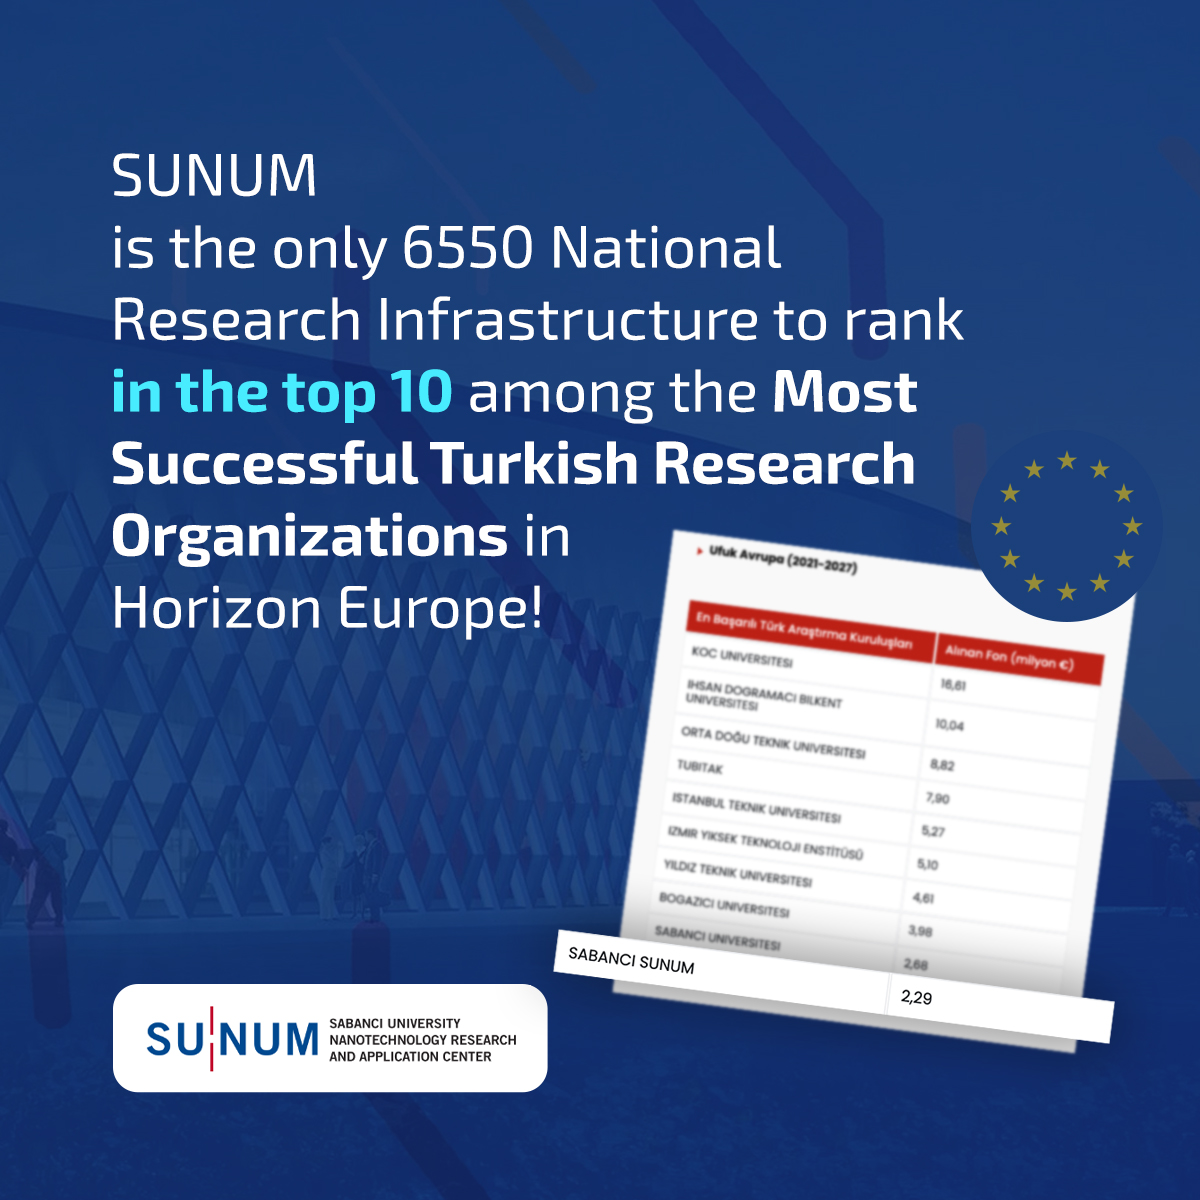 SUNUM is the only 6550 National Research Infrastructure to rank in the top 10 among the Most Successful Turkish Research Organizations in Horizon Europe!